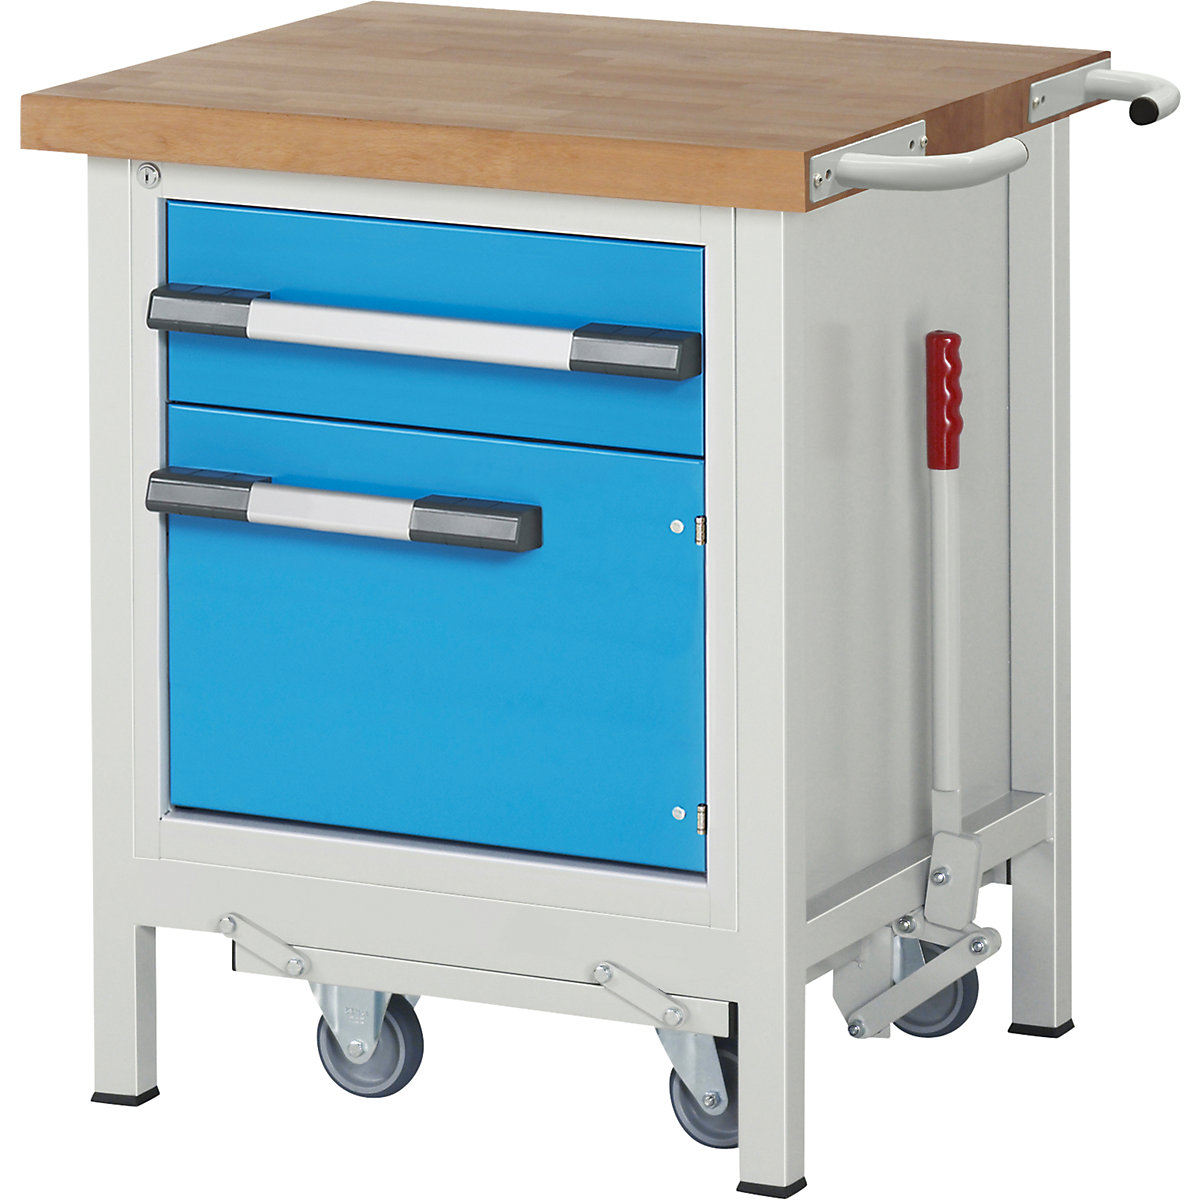 Mobile and lowerable workbench, Series 8000 frame construction – eurokraft pro